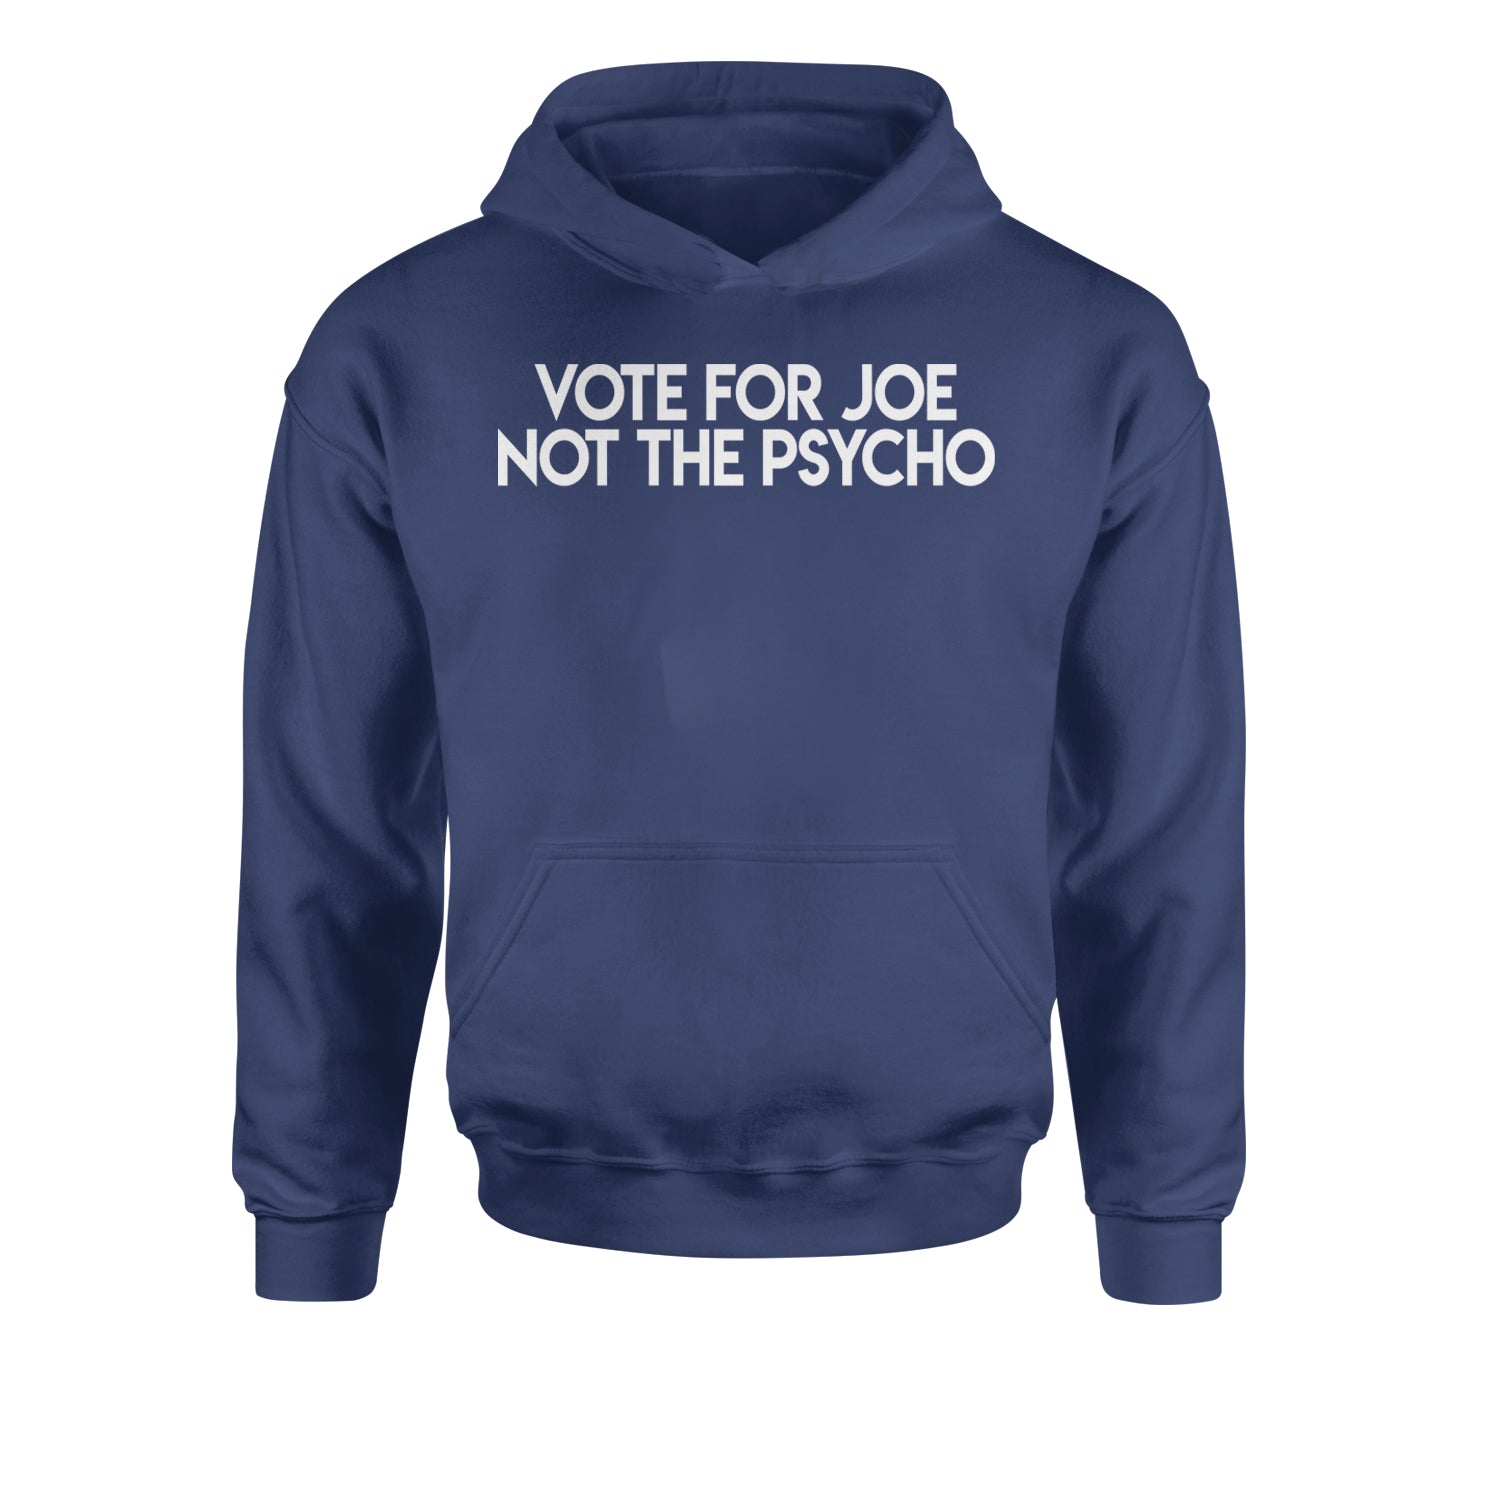 Vote For Joe Not The Psycho Youth-Sized Hoodie